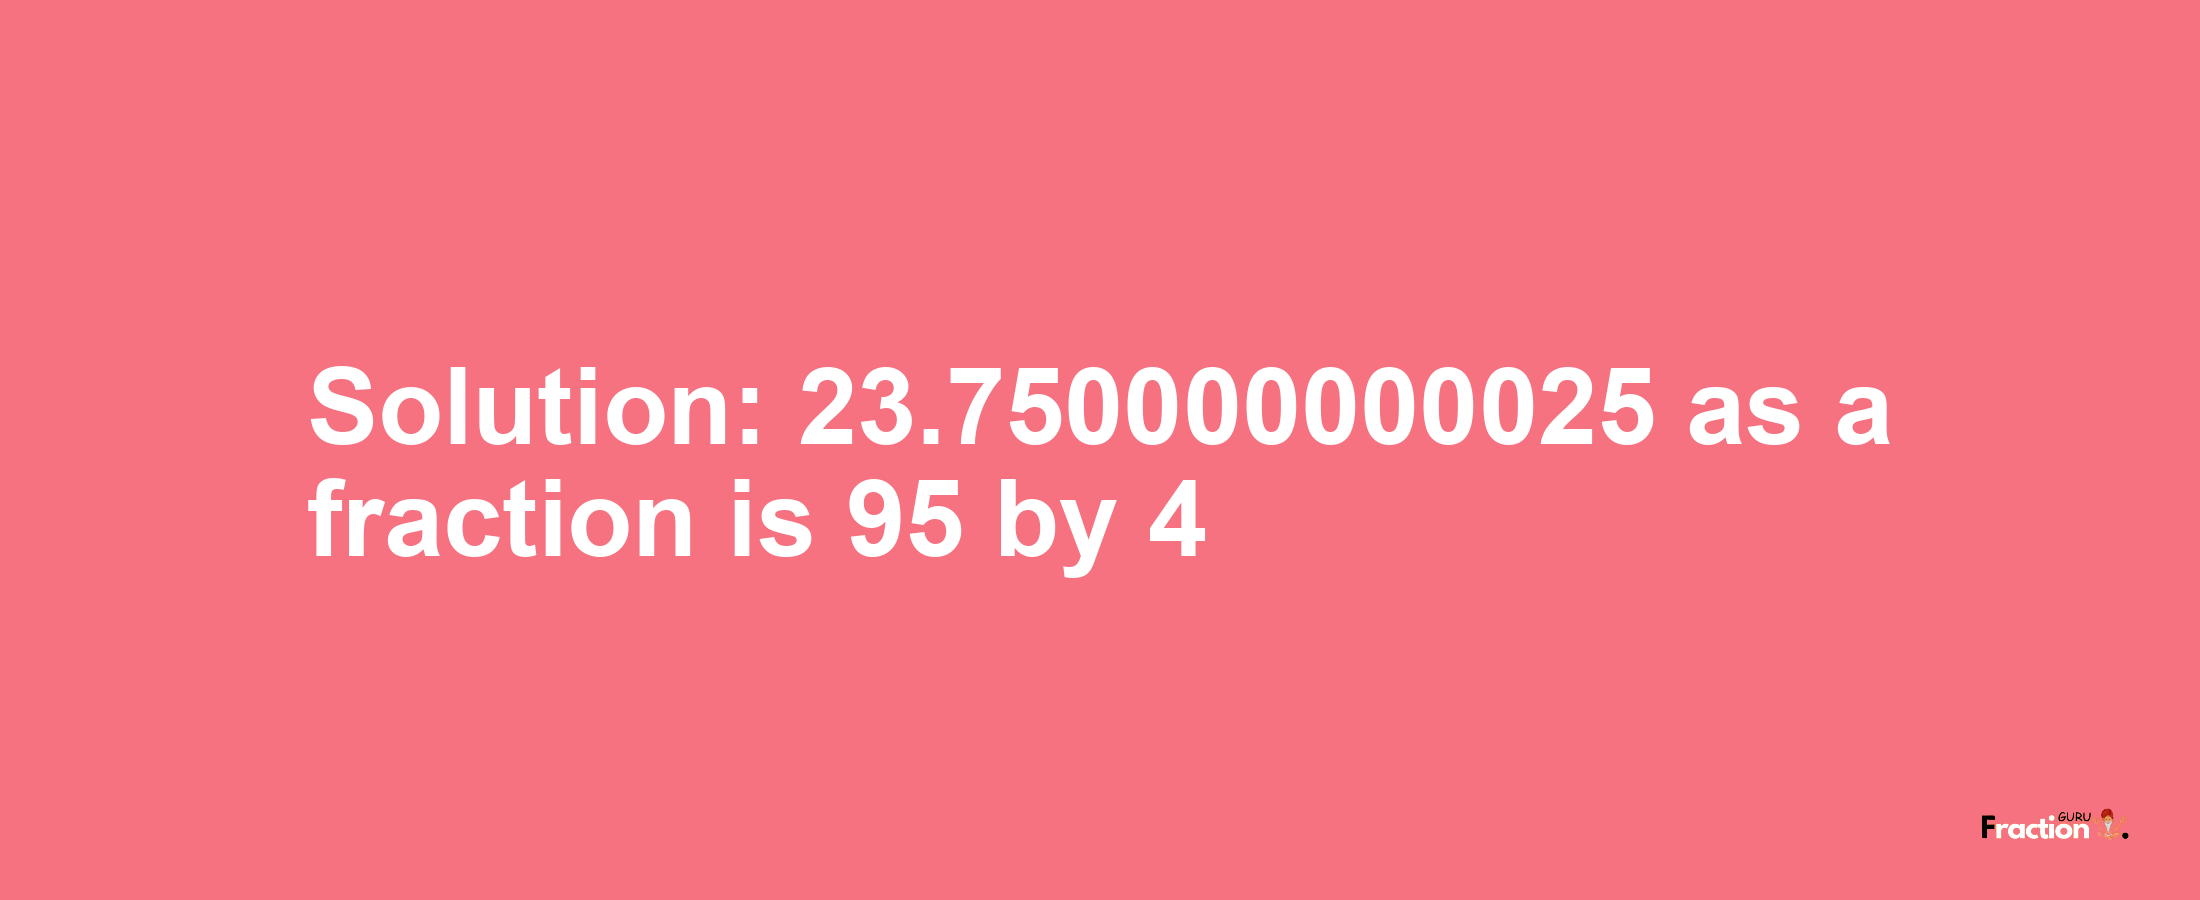 Solution:23.750000000025 as a fraction is 95/4